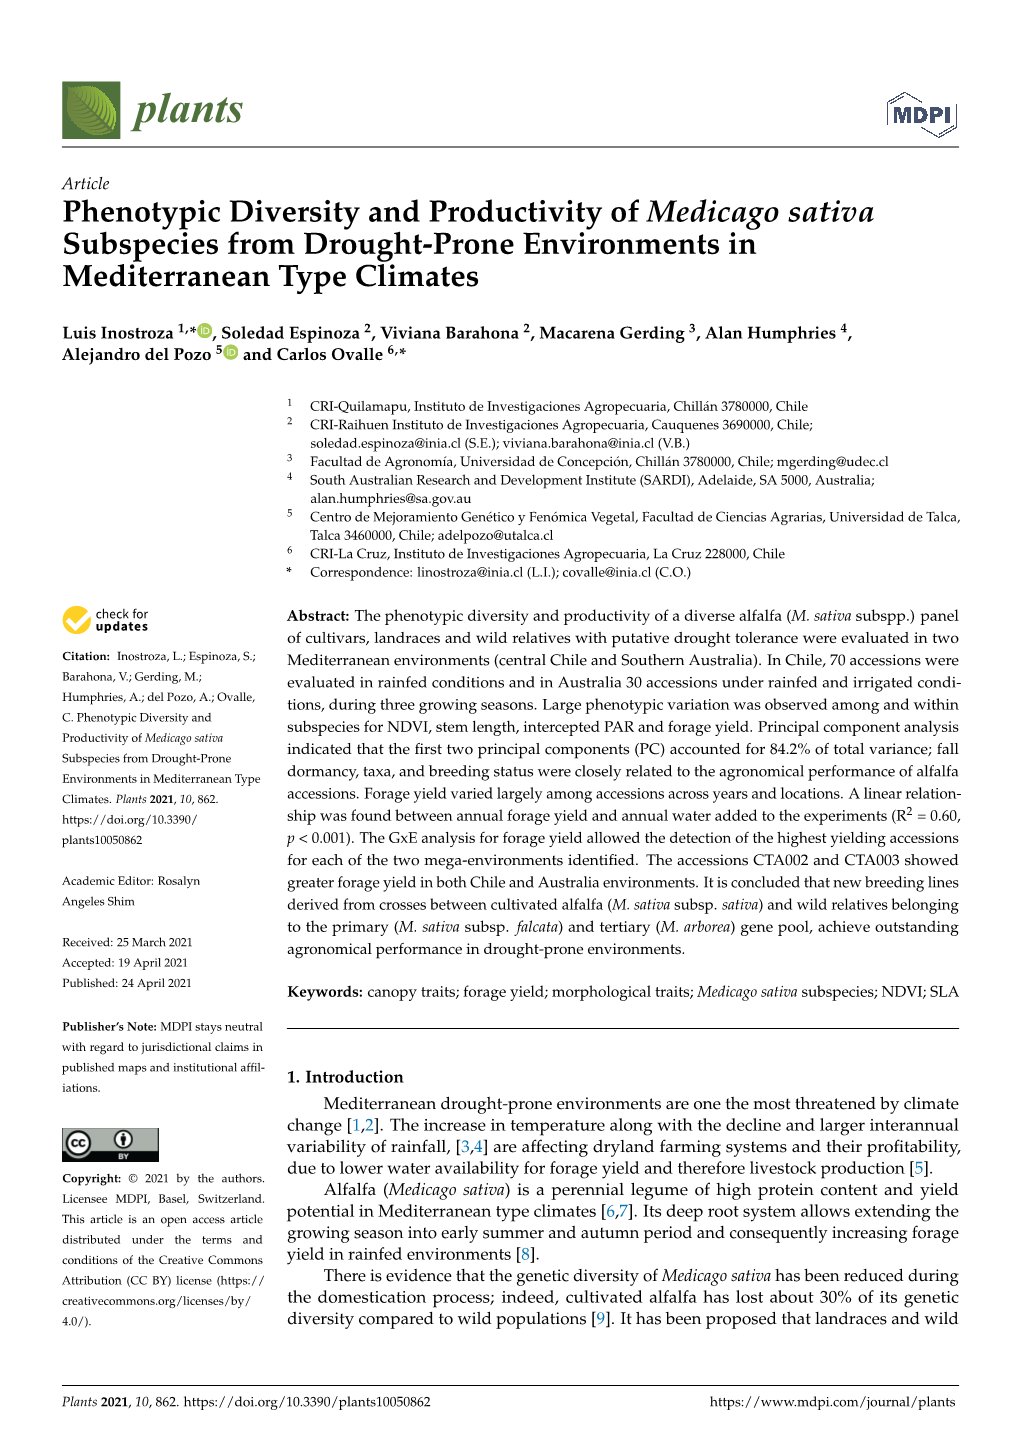 Phenotypic Diversity and Productivity of Medicago Sativa Subspecies from Drought-Prone Environments in Mediterranean Type Climates